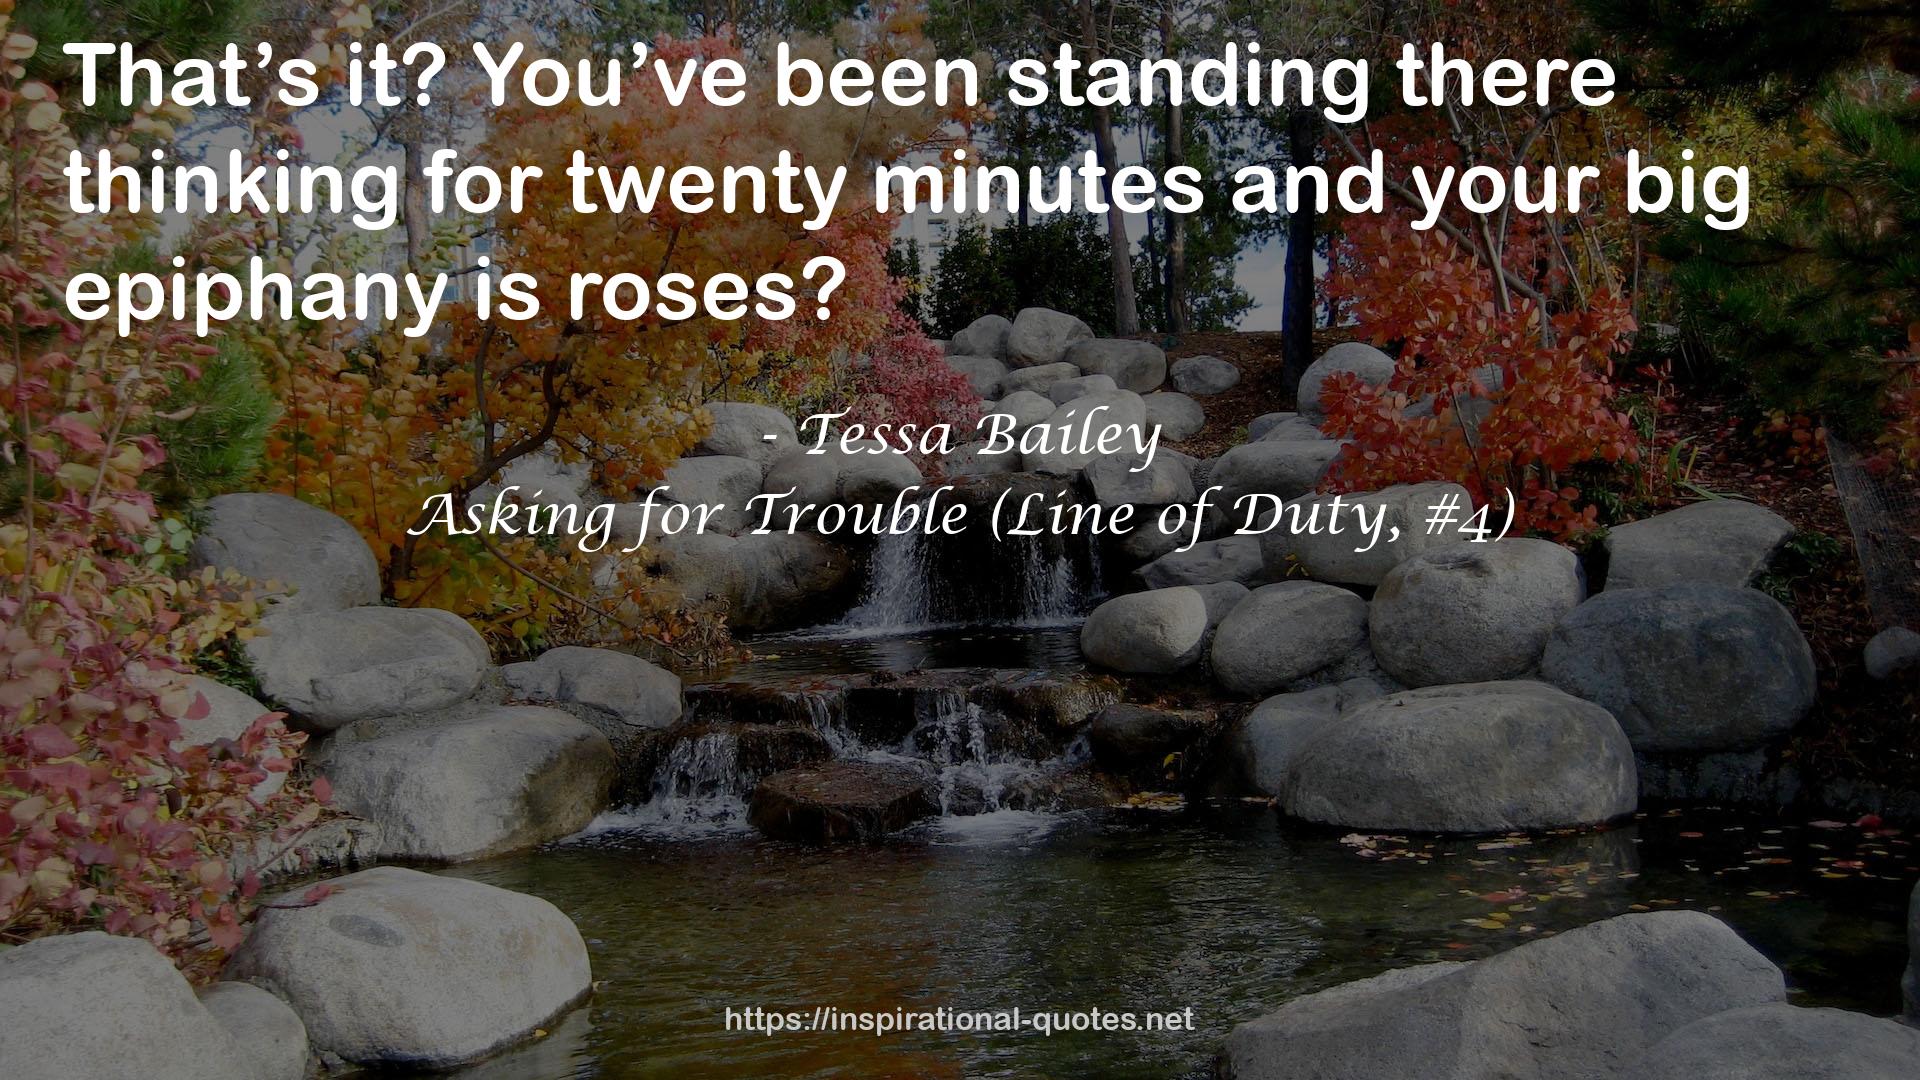 Asking for Trouble (Line of Duty, #4) QUOTES